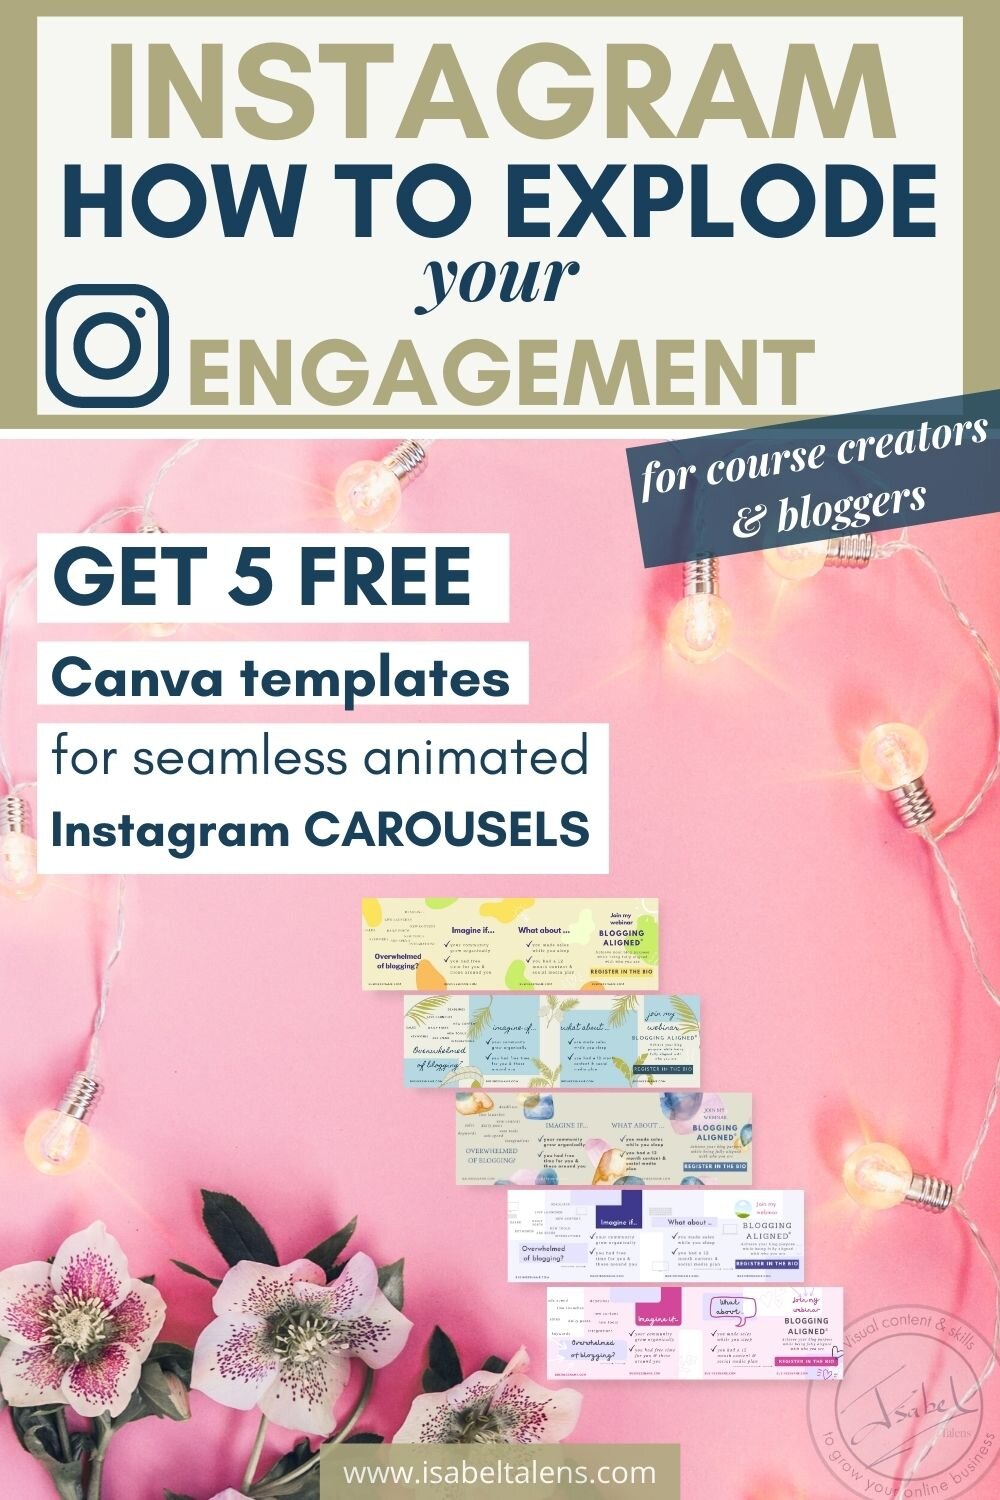 5 Unique Ways to Animate Text in Canva to Make Your Instagram